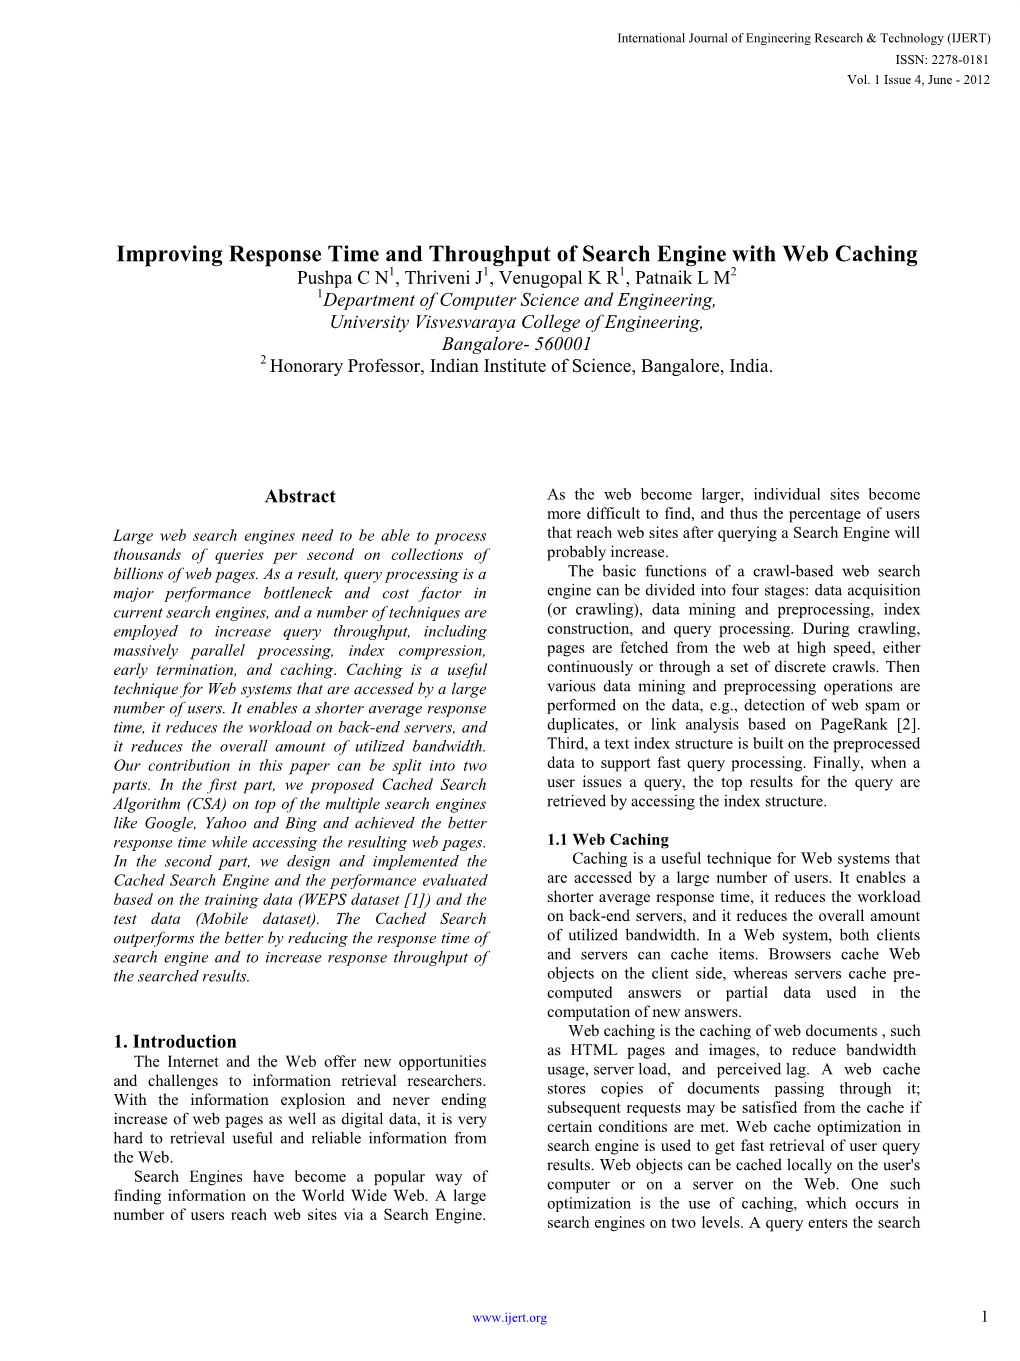 Improving Response Time and Throughput of Search Engine with Web Caching